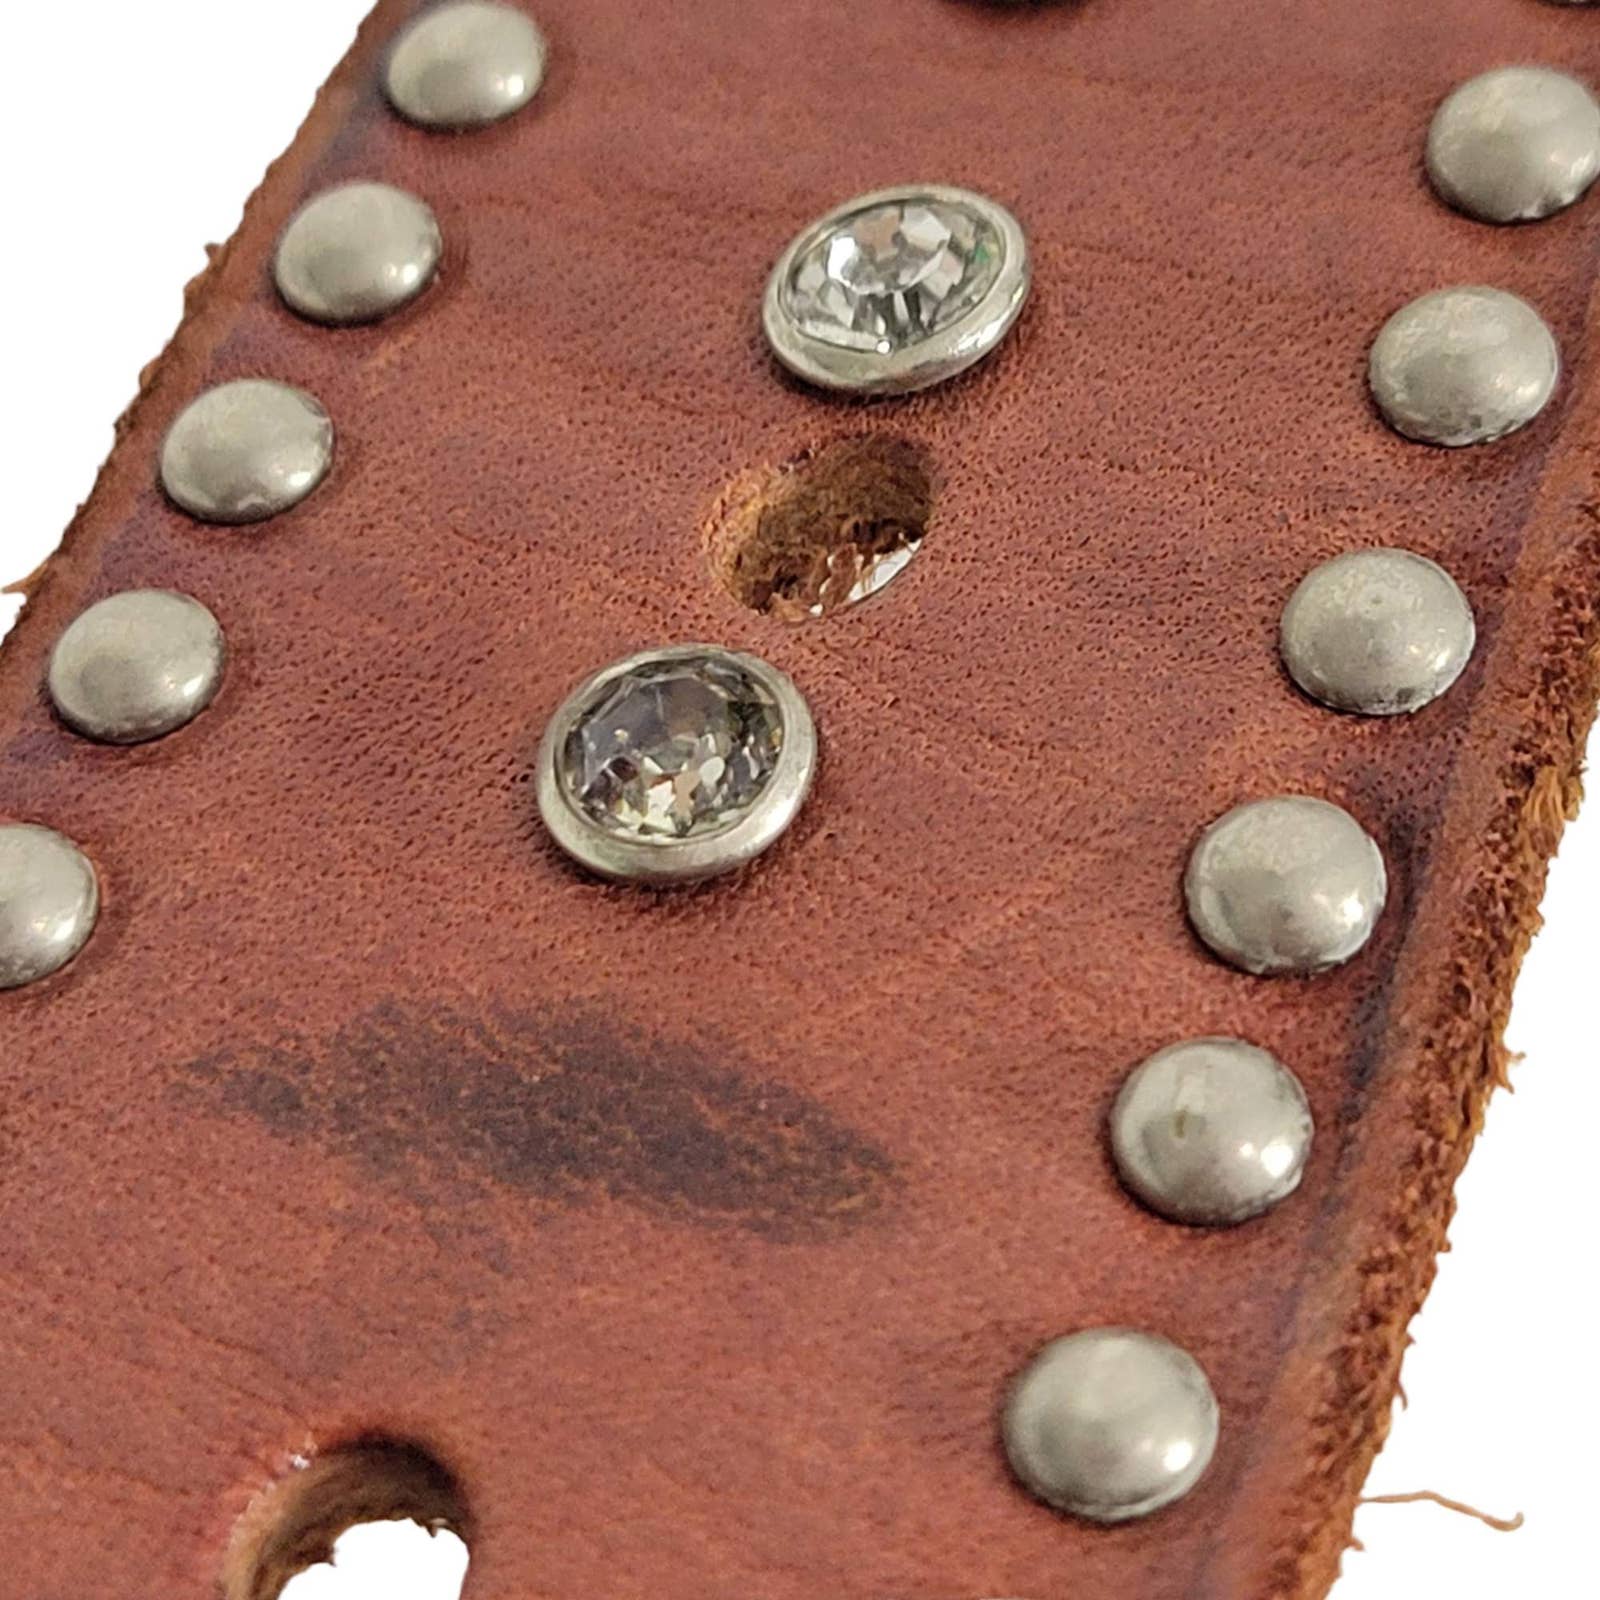 Jigsaw Brown Leather Belt Western Studs Bling Crystals Embellished Rivets Small